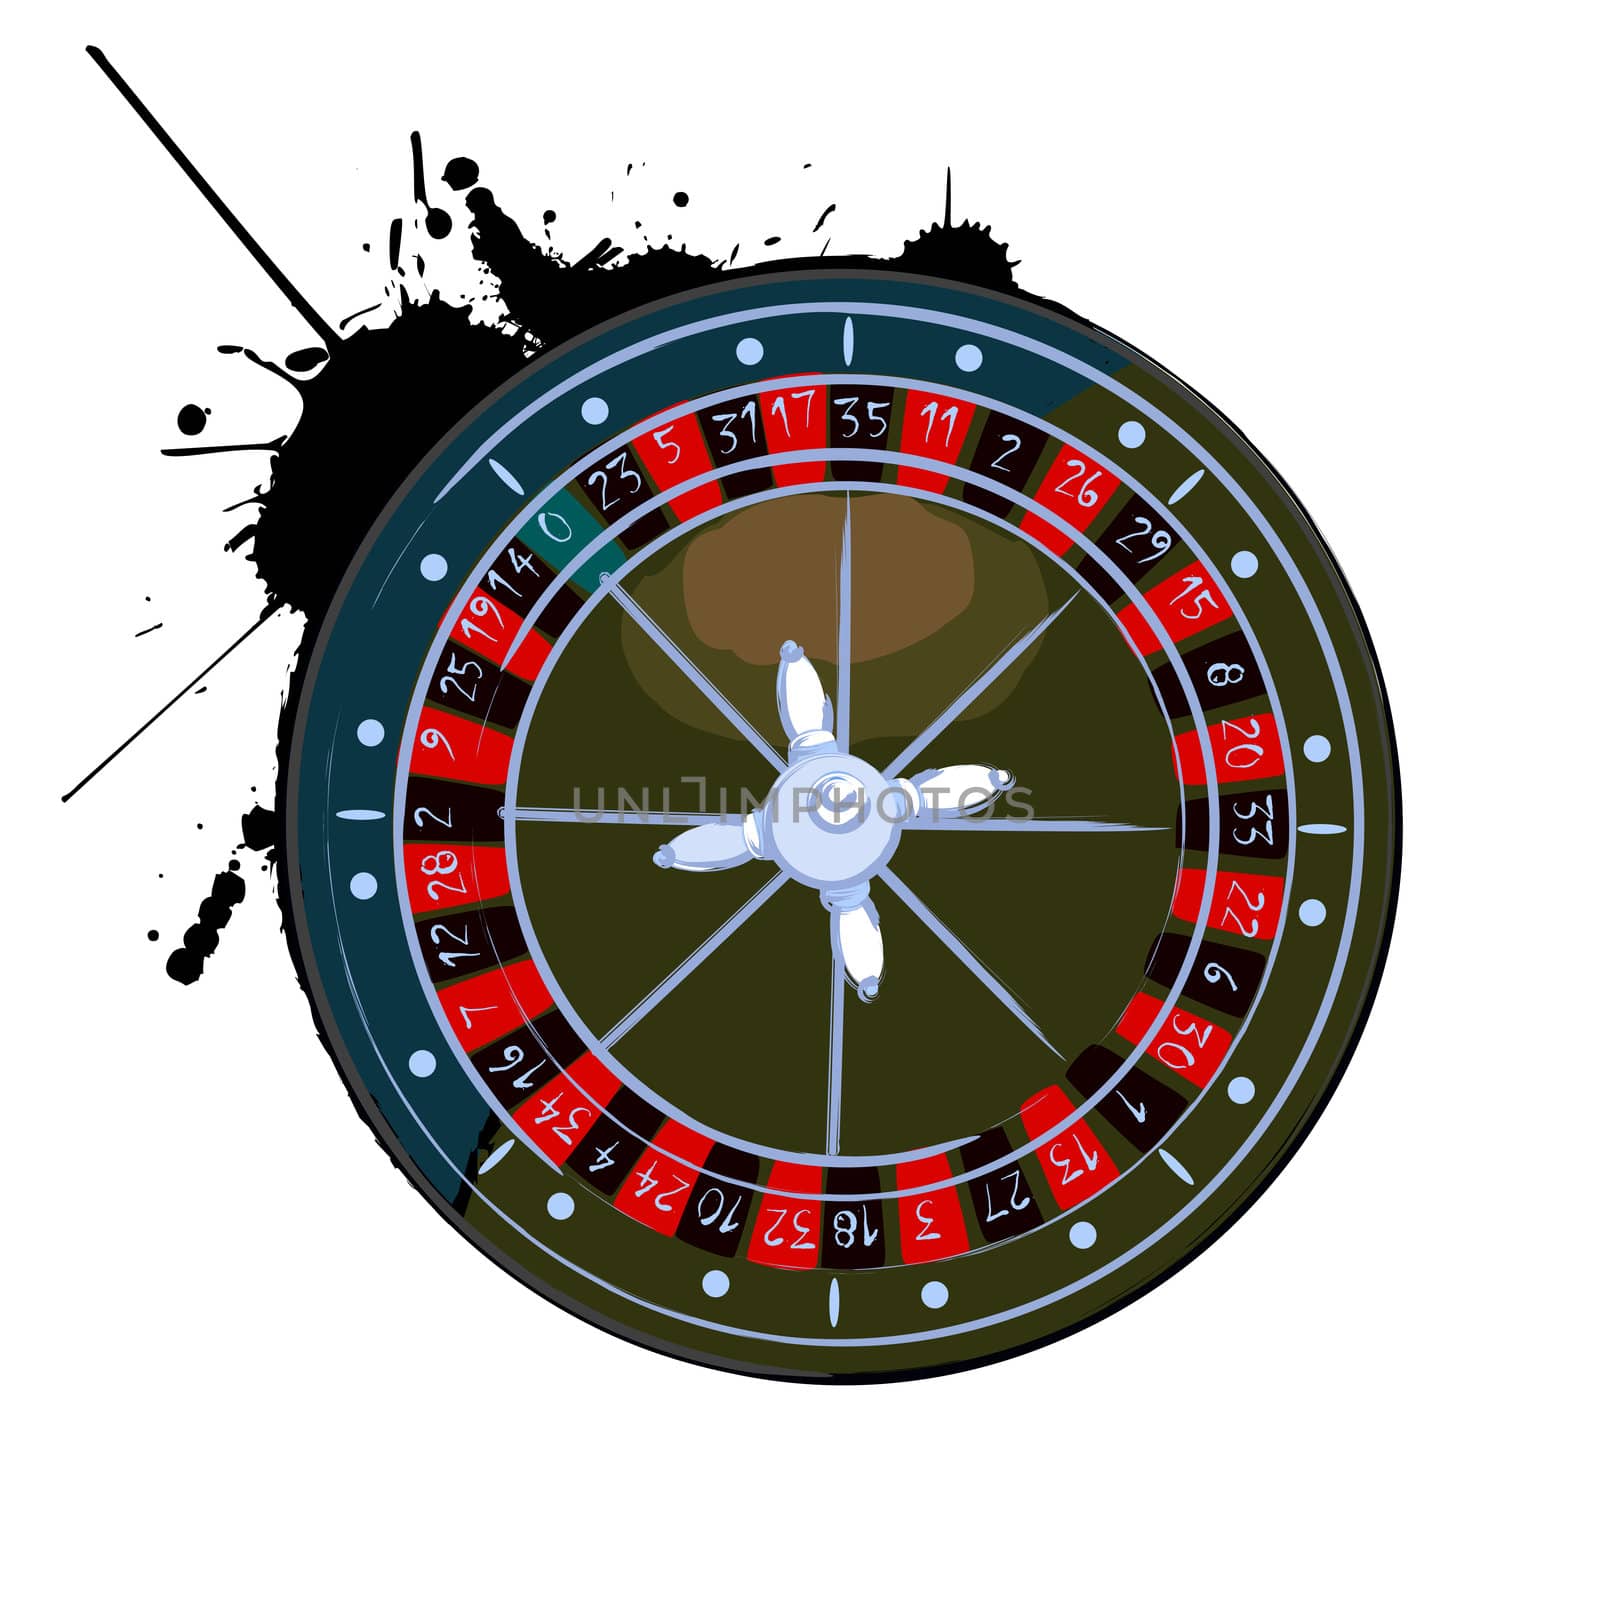 Old roulette wheel over white background